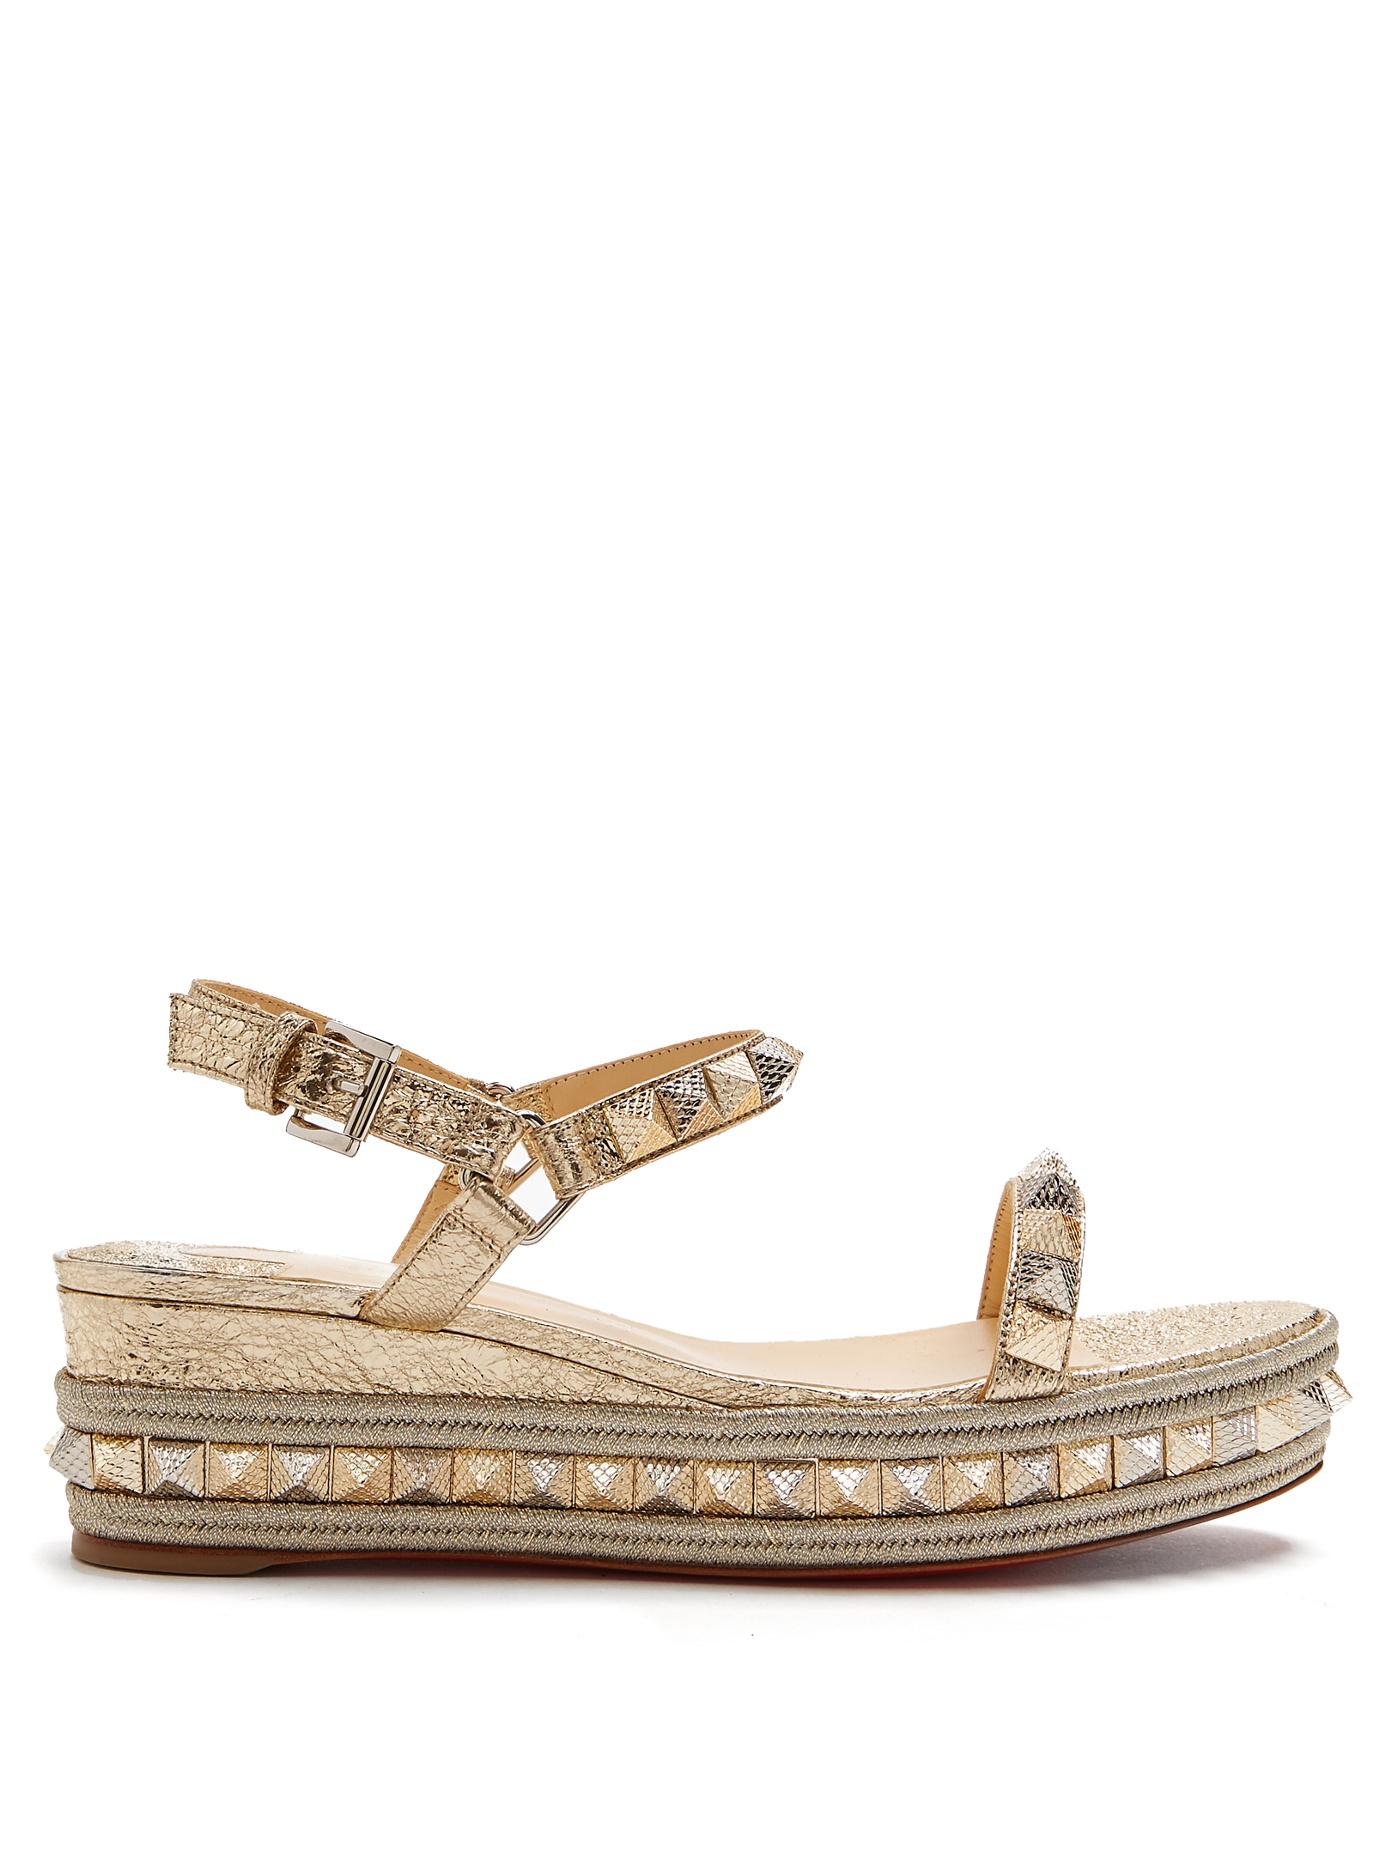 Christian Louboutin Leather Pyraclou 60mm Flatform Espadrilles in Gold ...